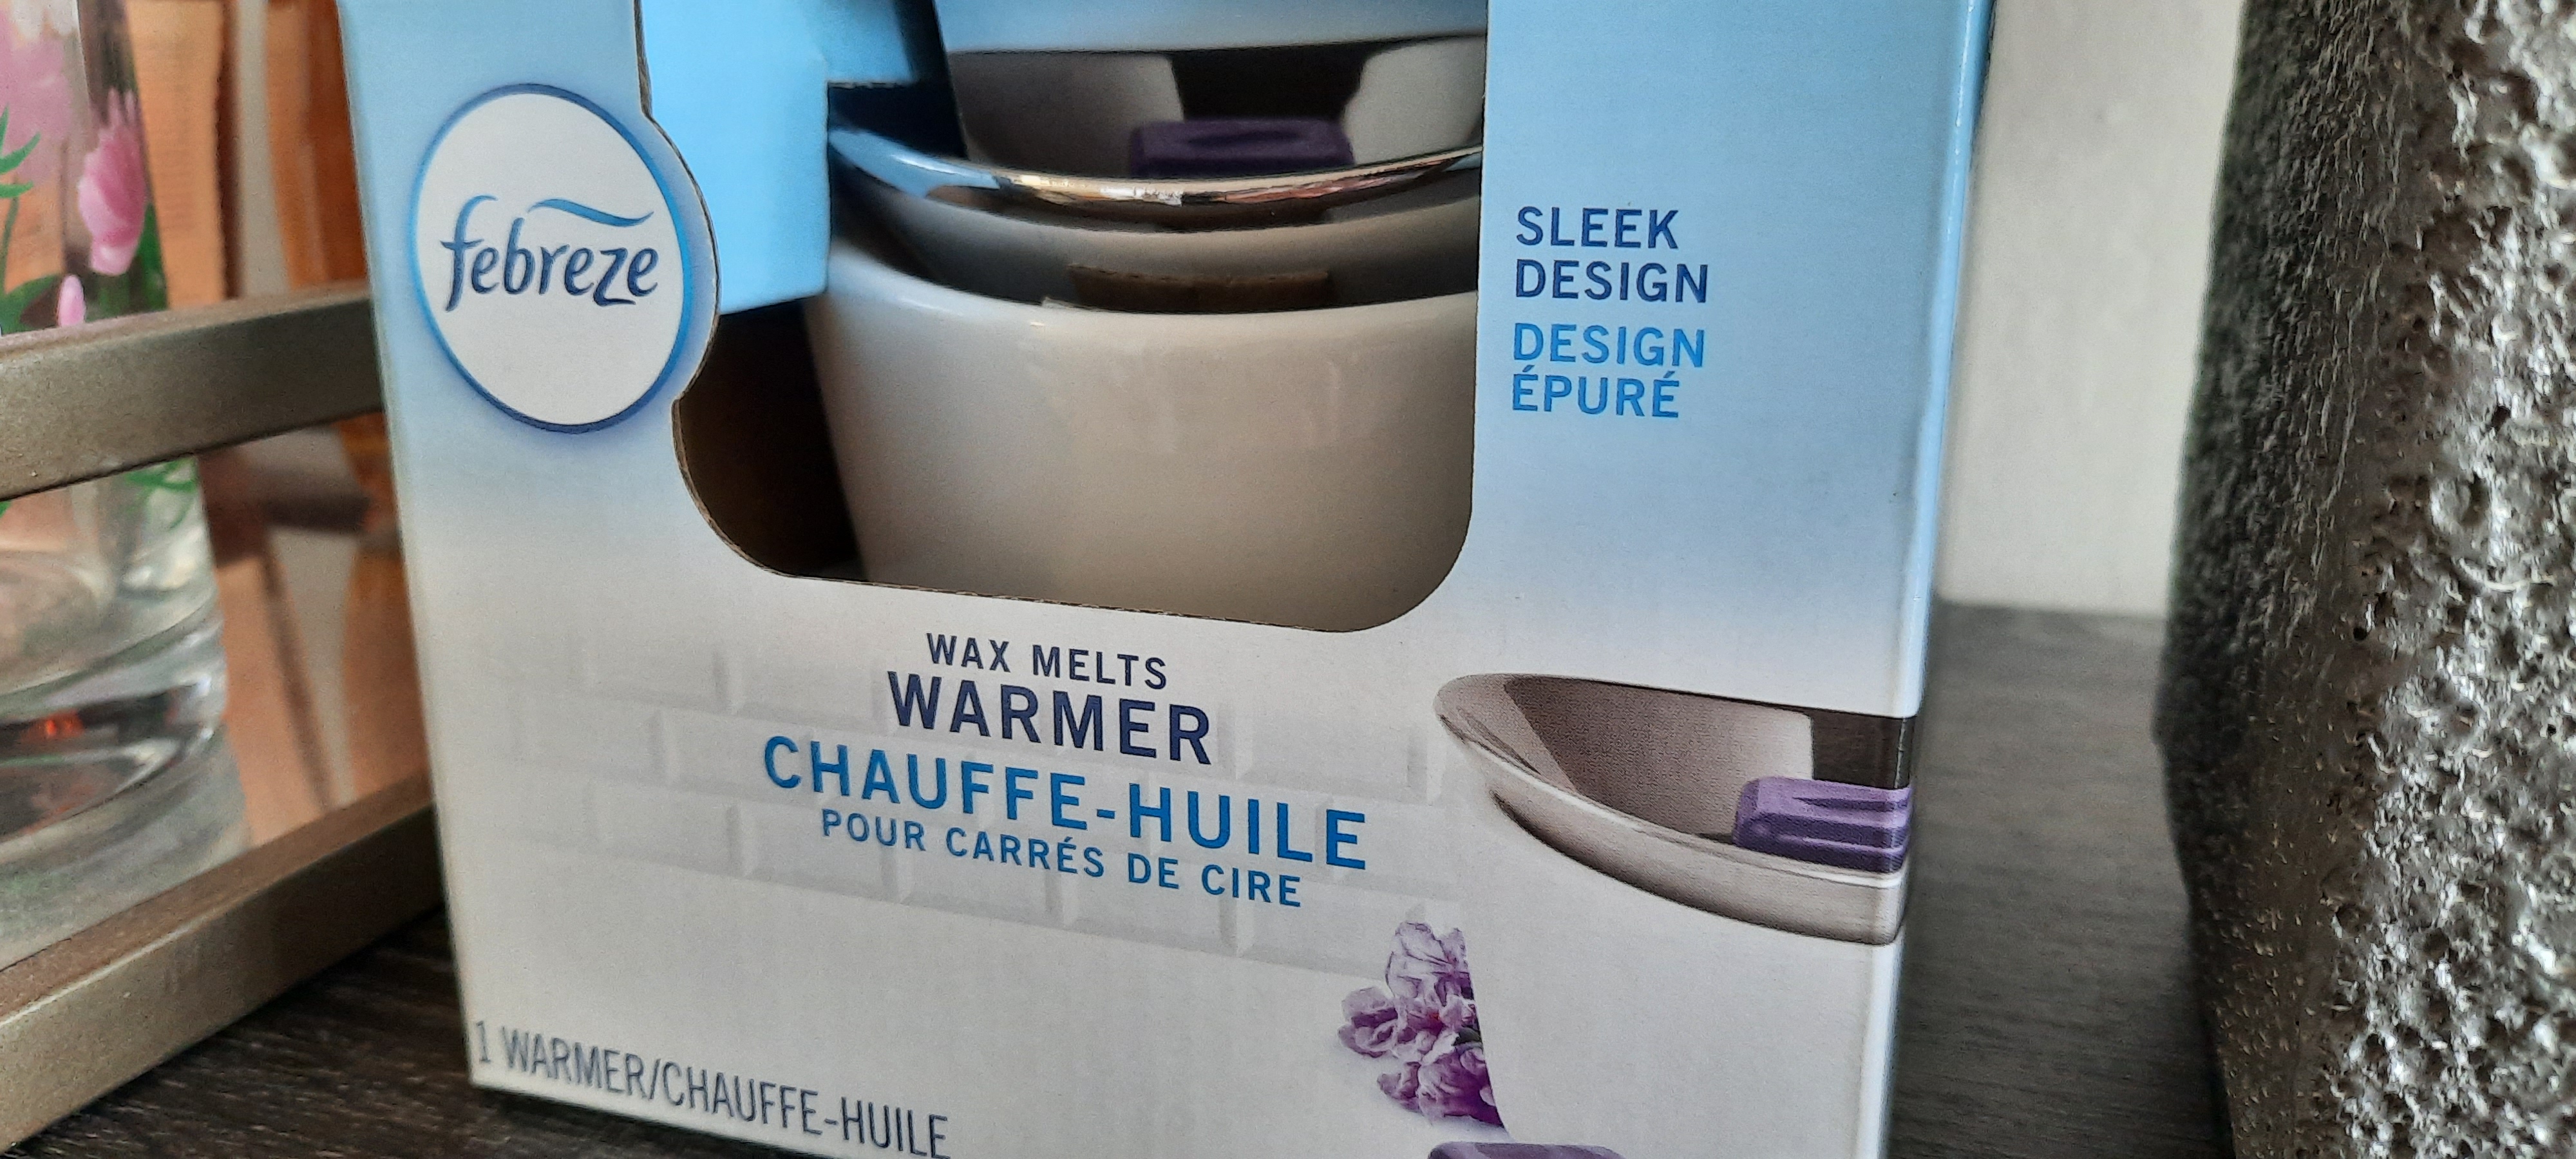 How to use the Febreze wax melts warmer device